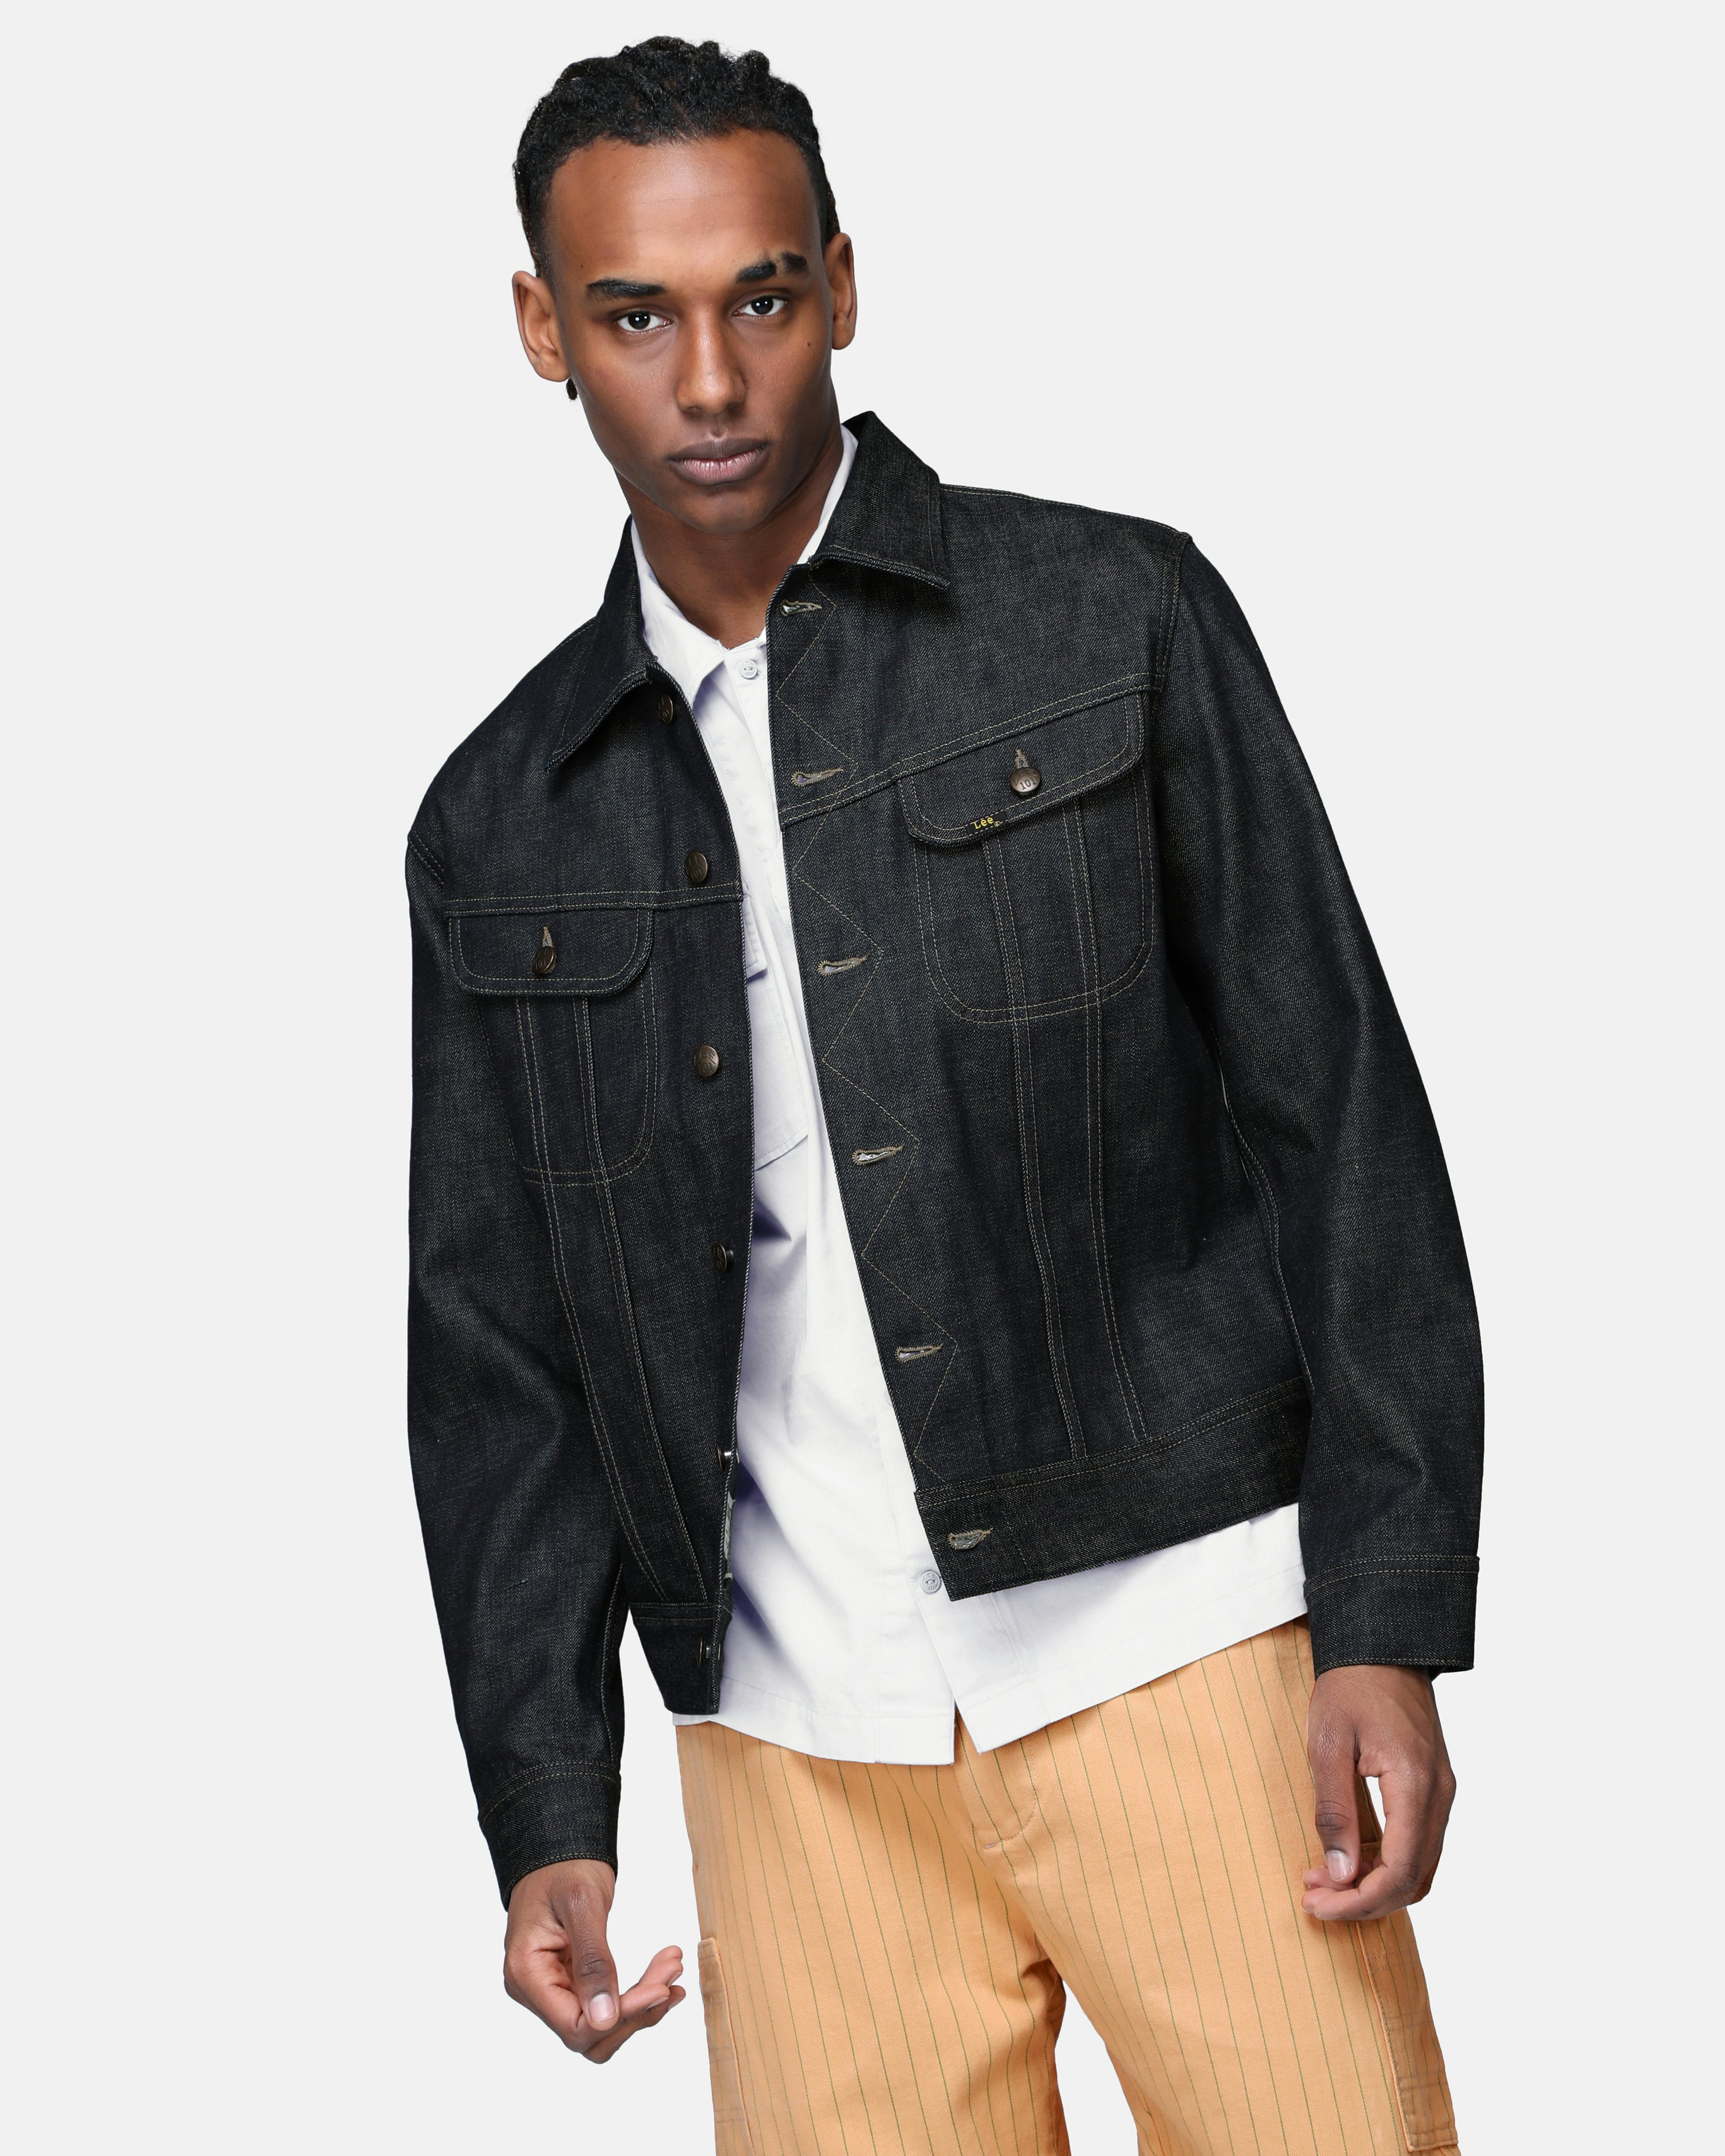 Top more than 78 lee rider jacket black latest - in.thdonghoadian